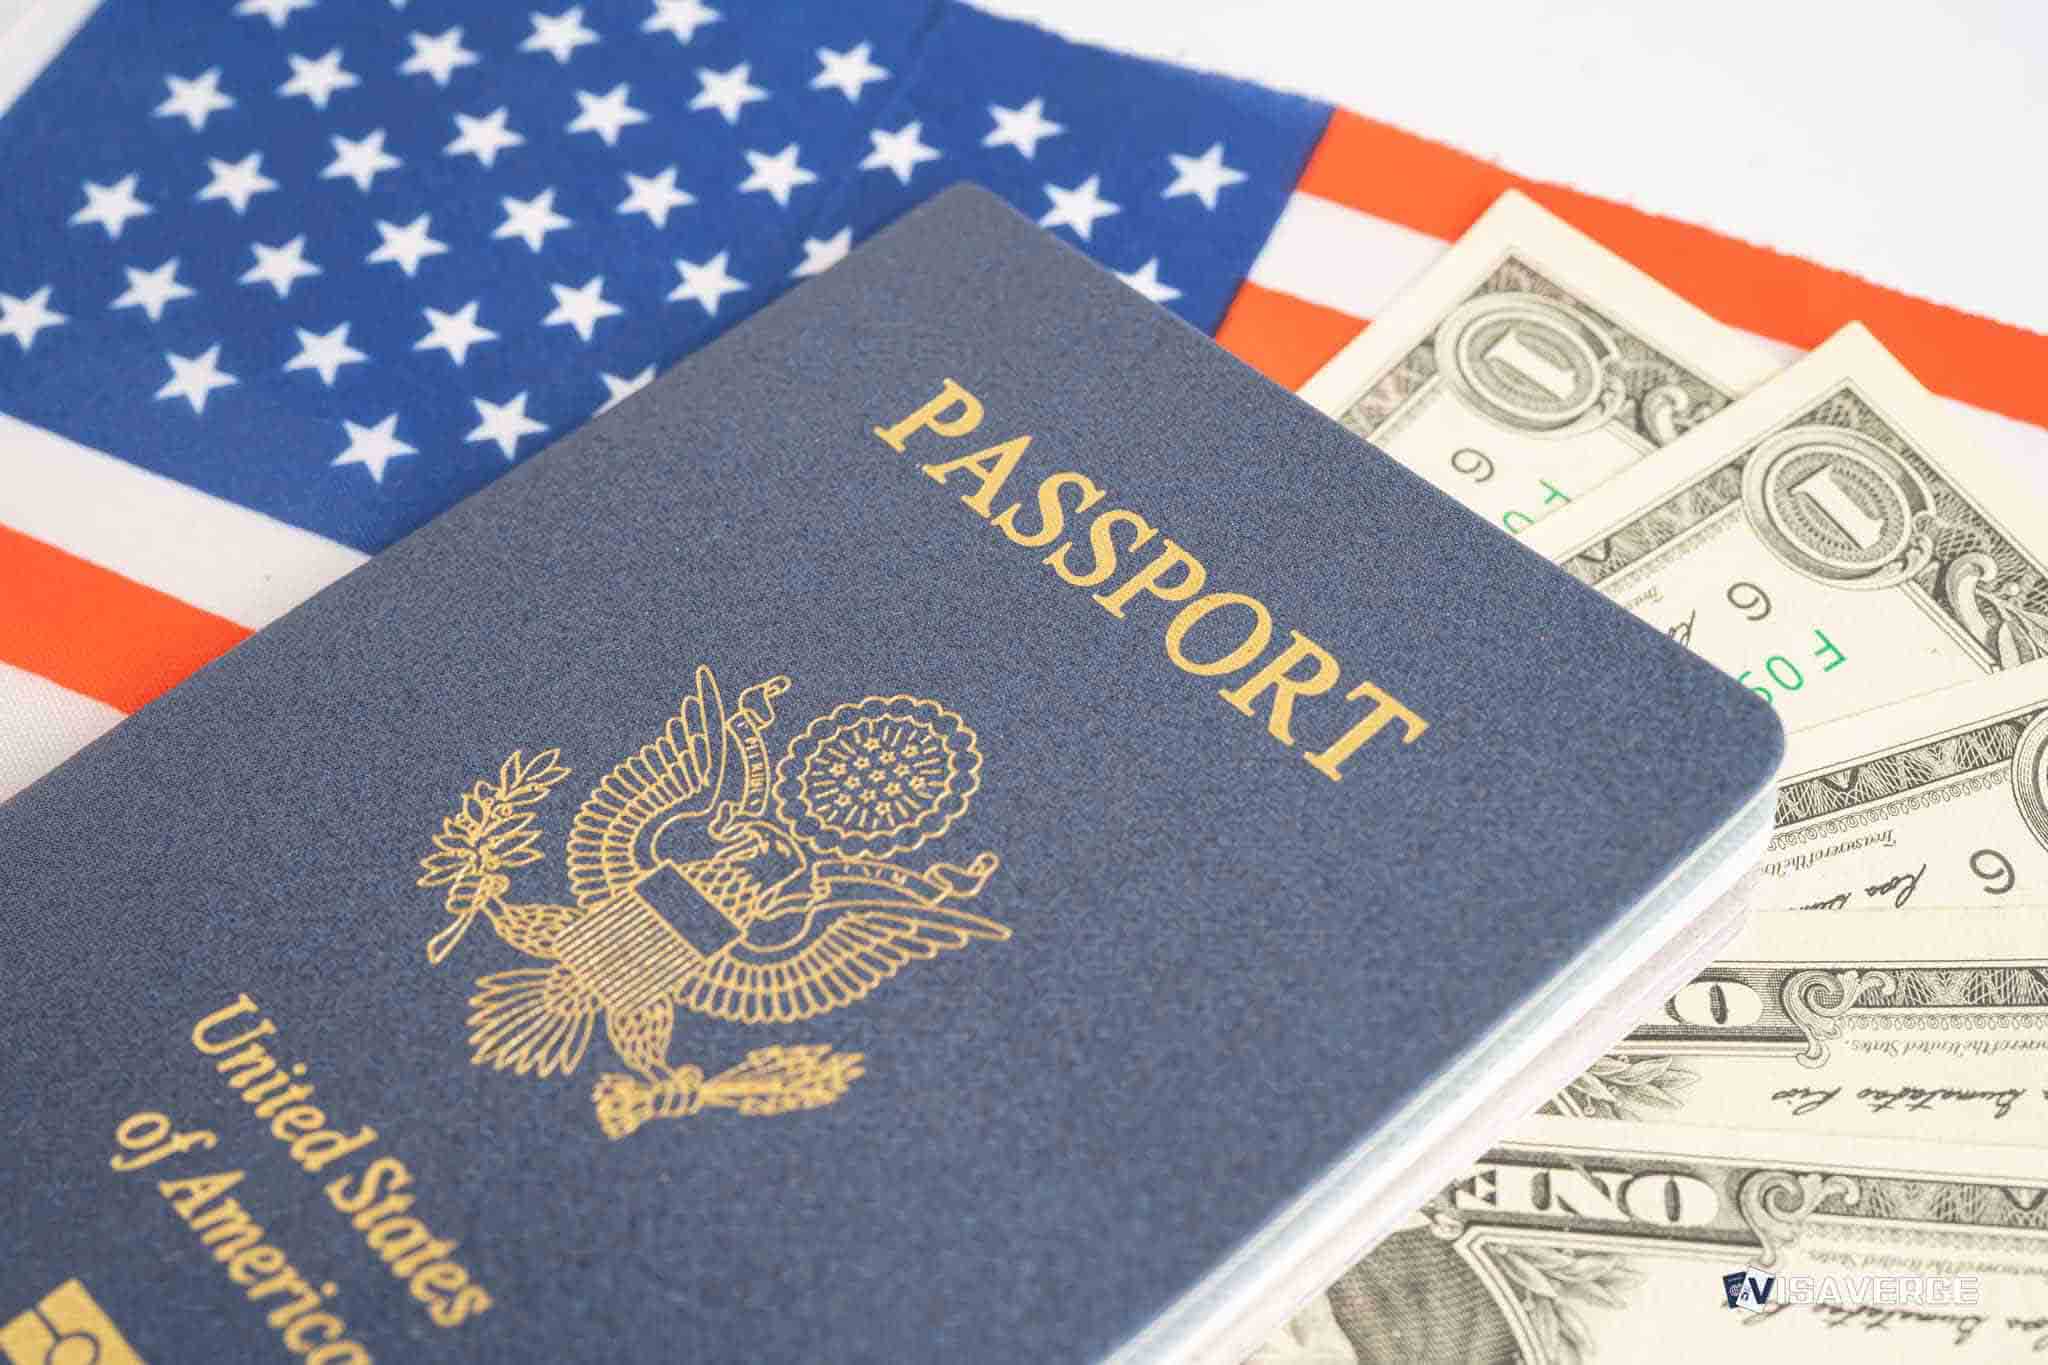 Meeting Financial Requirements for the J-1 Visa: How to Qualify